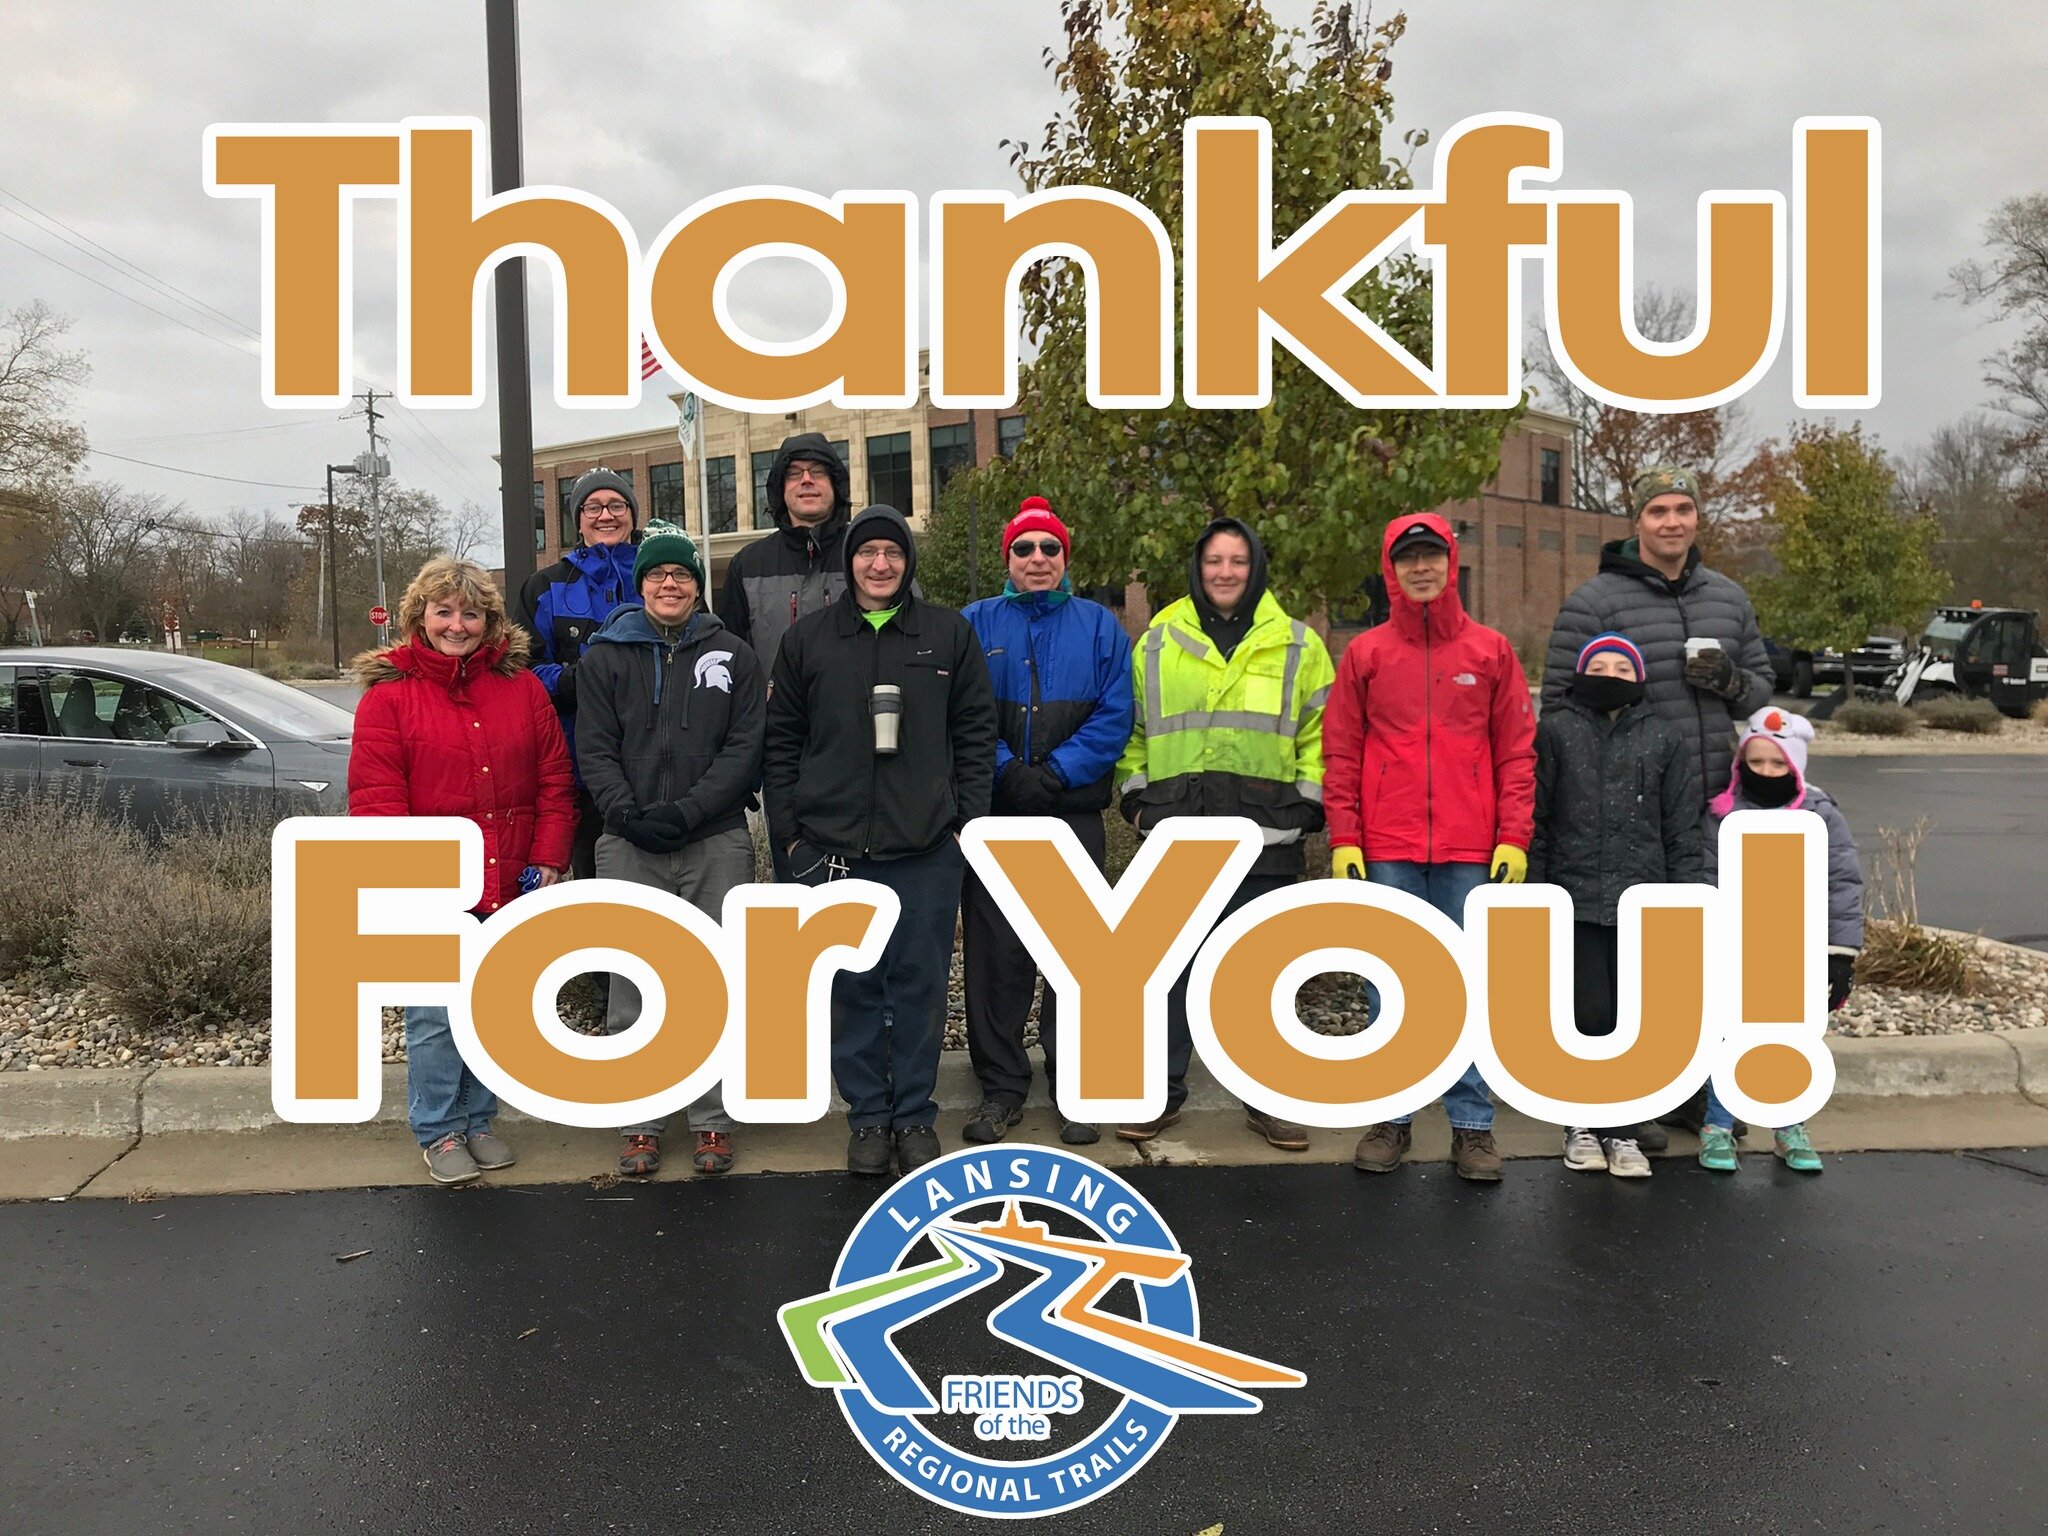 Today and every day, we are thankful for YOU! Whether you are a volunteer, a member, a donor, or a trail enthusiast... thank you for all you do!